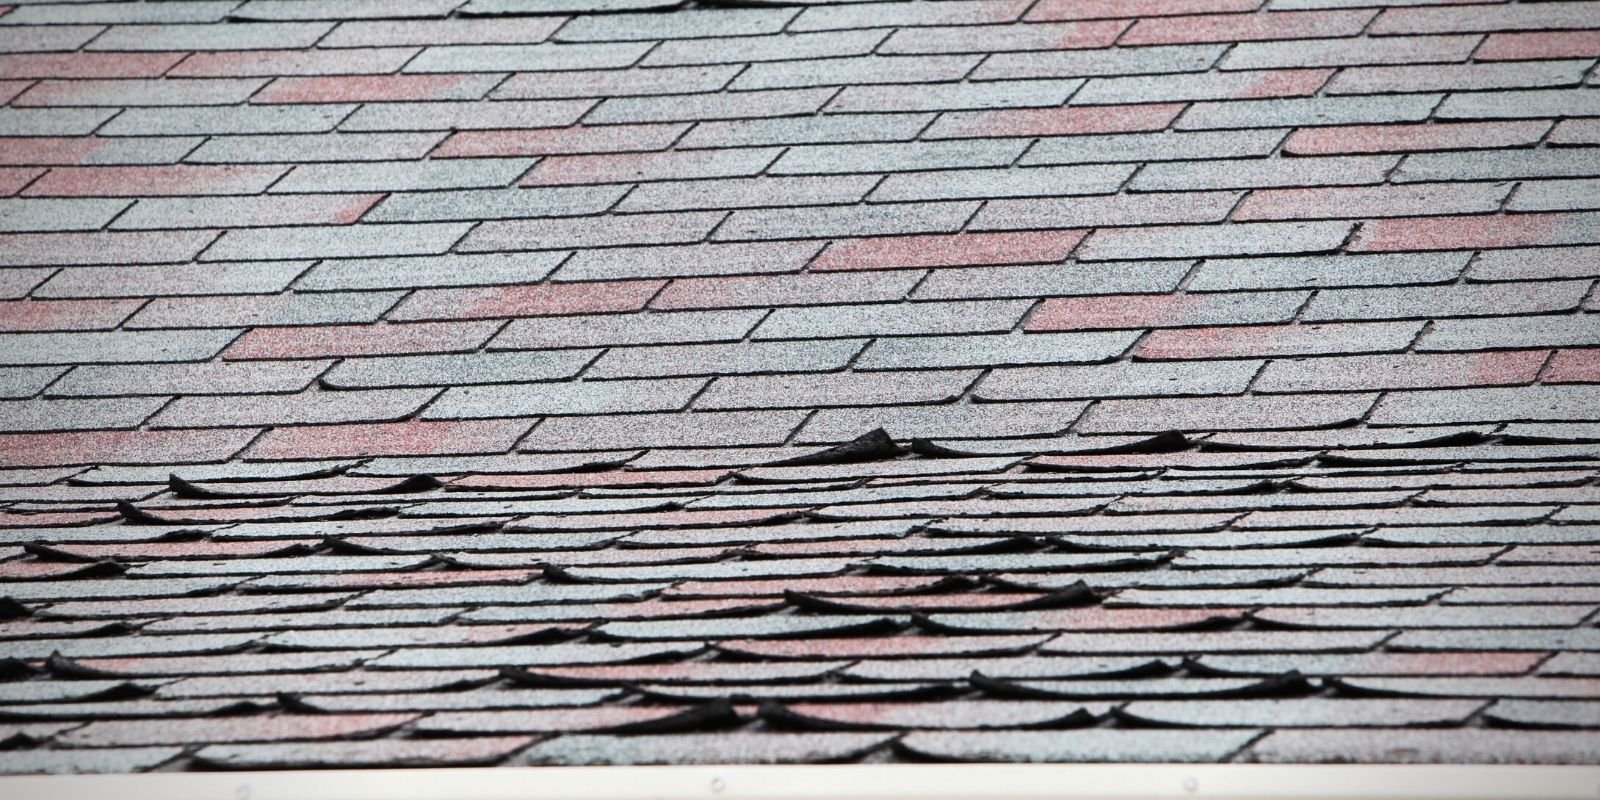 Damages shingles on a roof